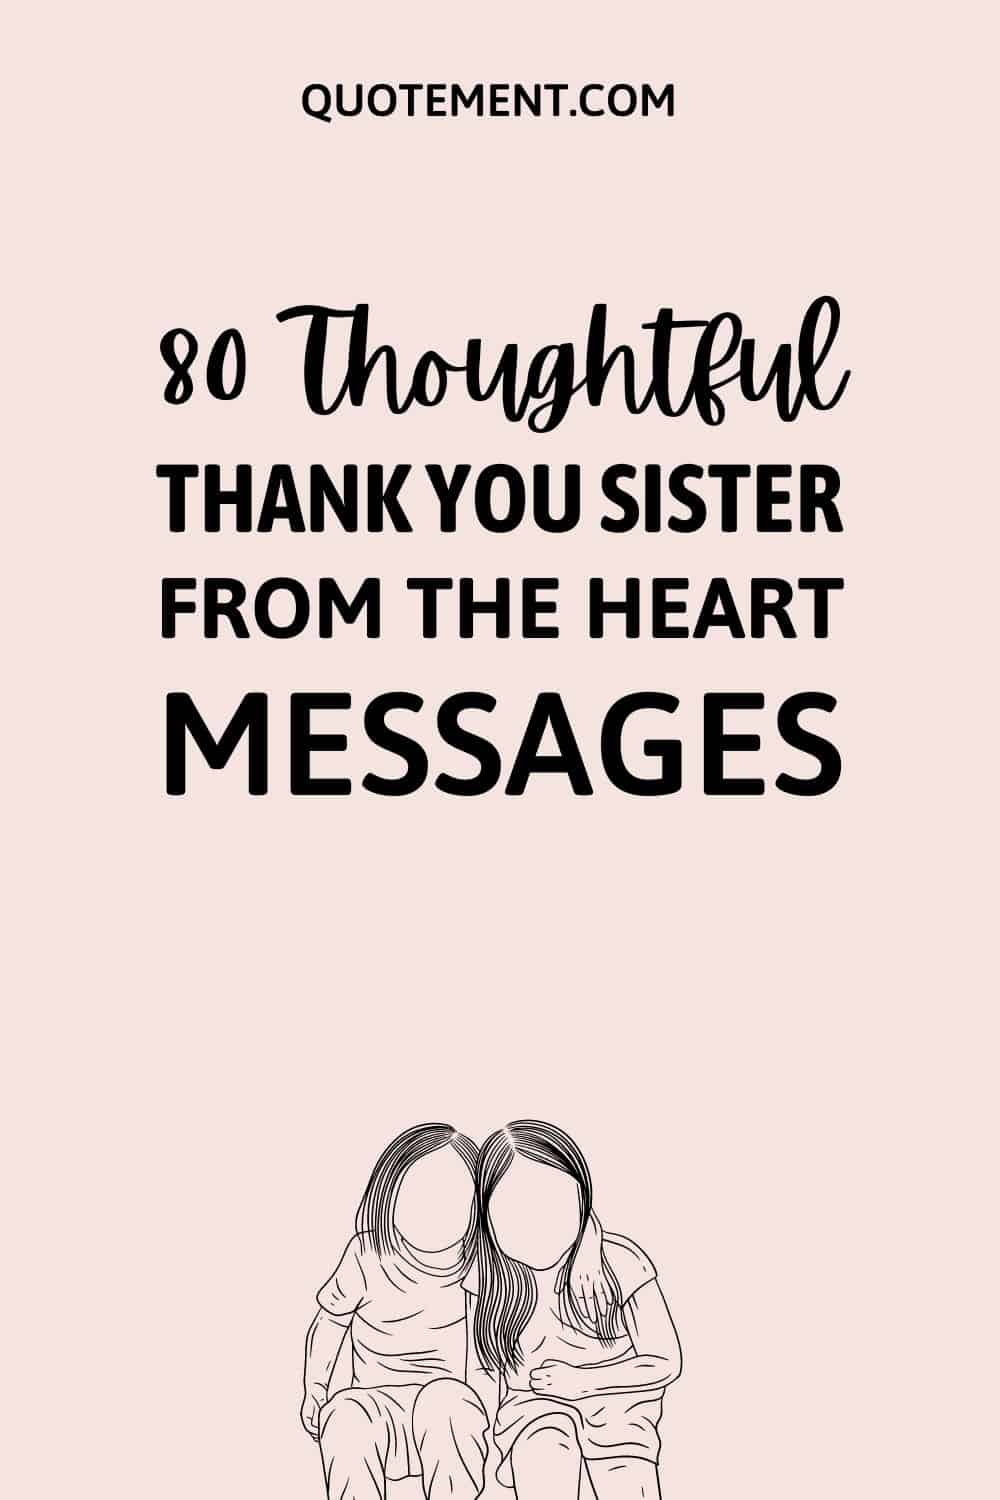 80 Thoughtful Thank You Sister Messages From The Heart
